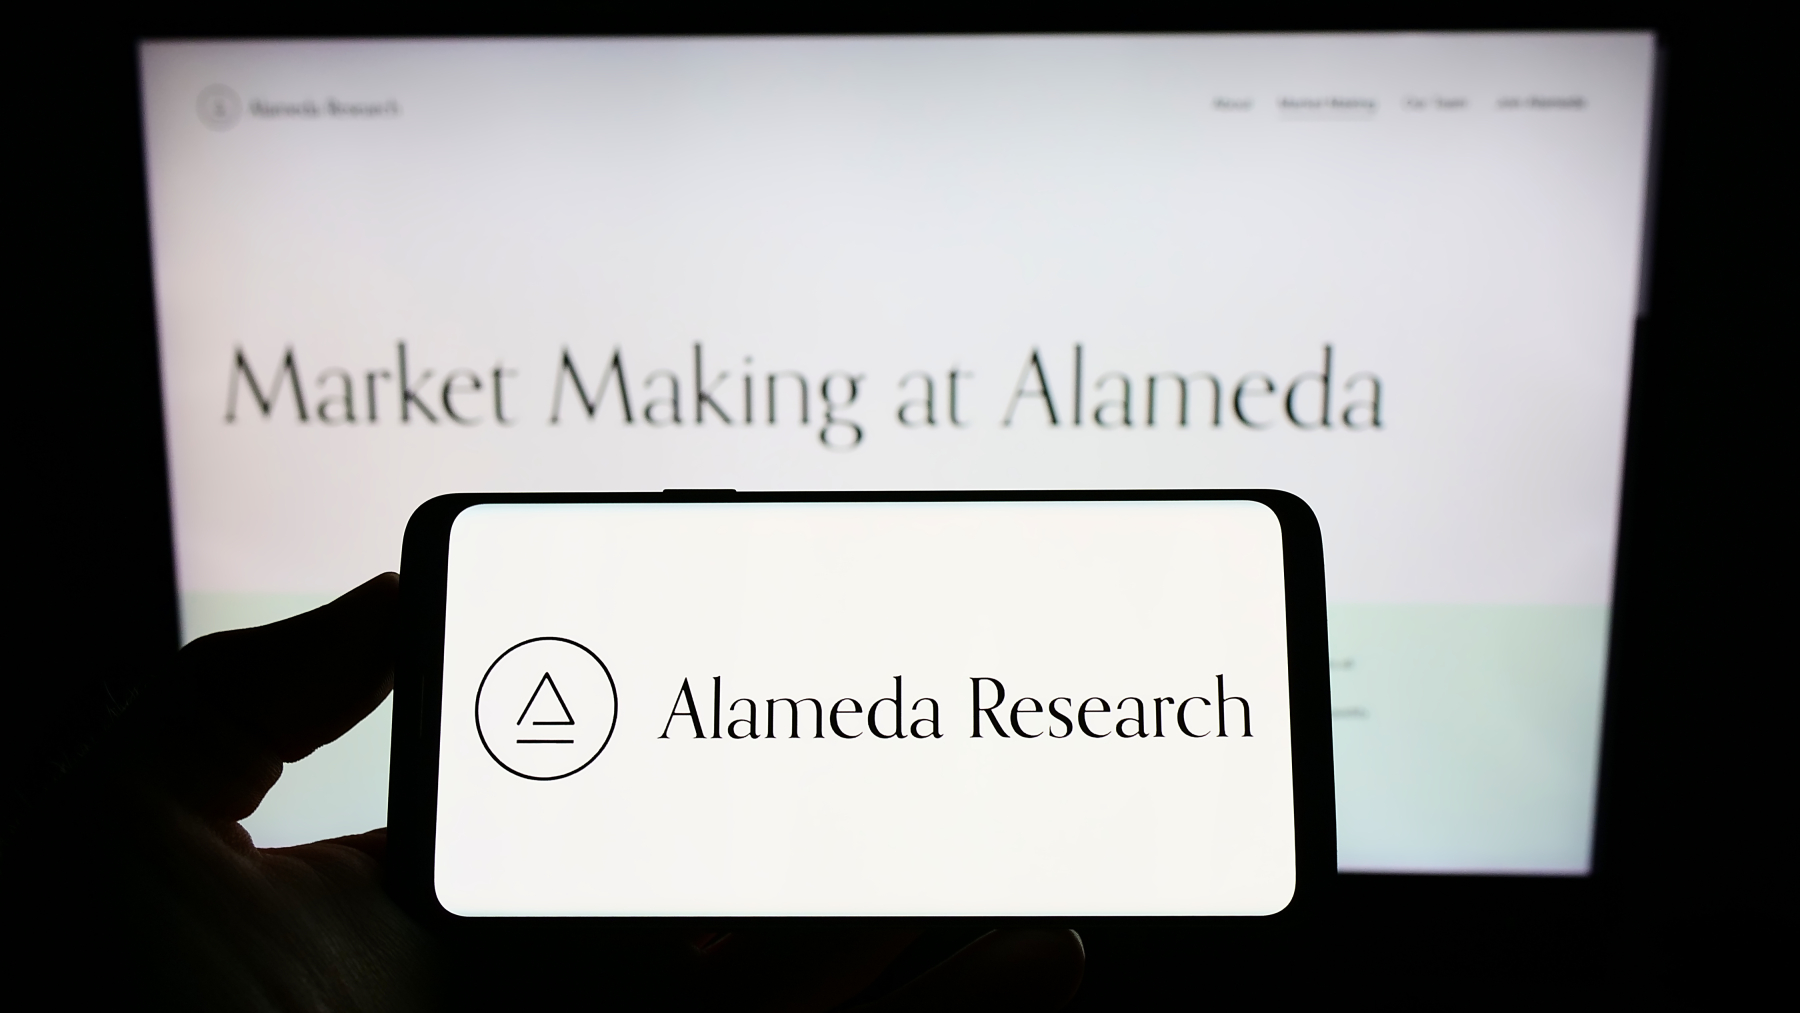 Alameda Research engaged in insider trading
